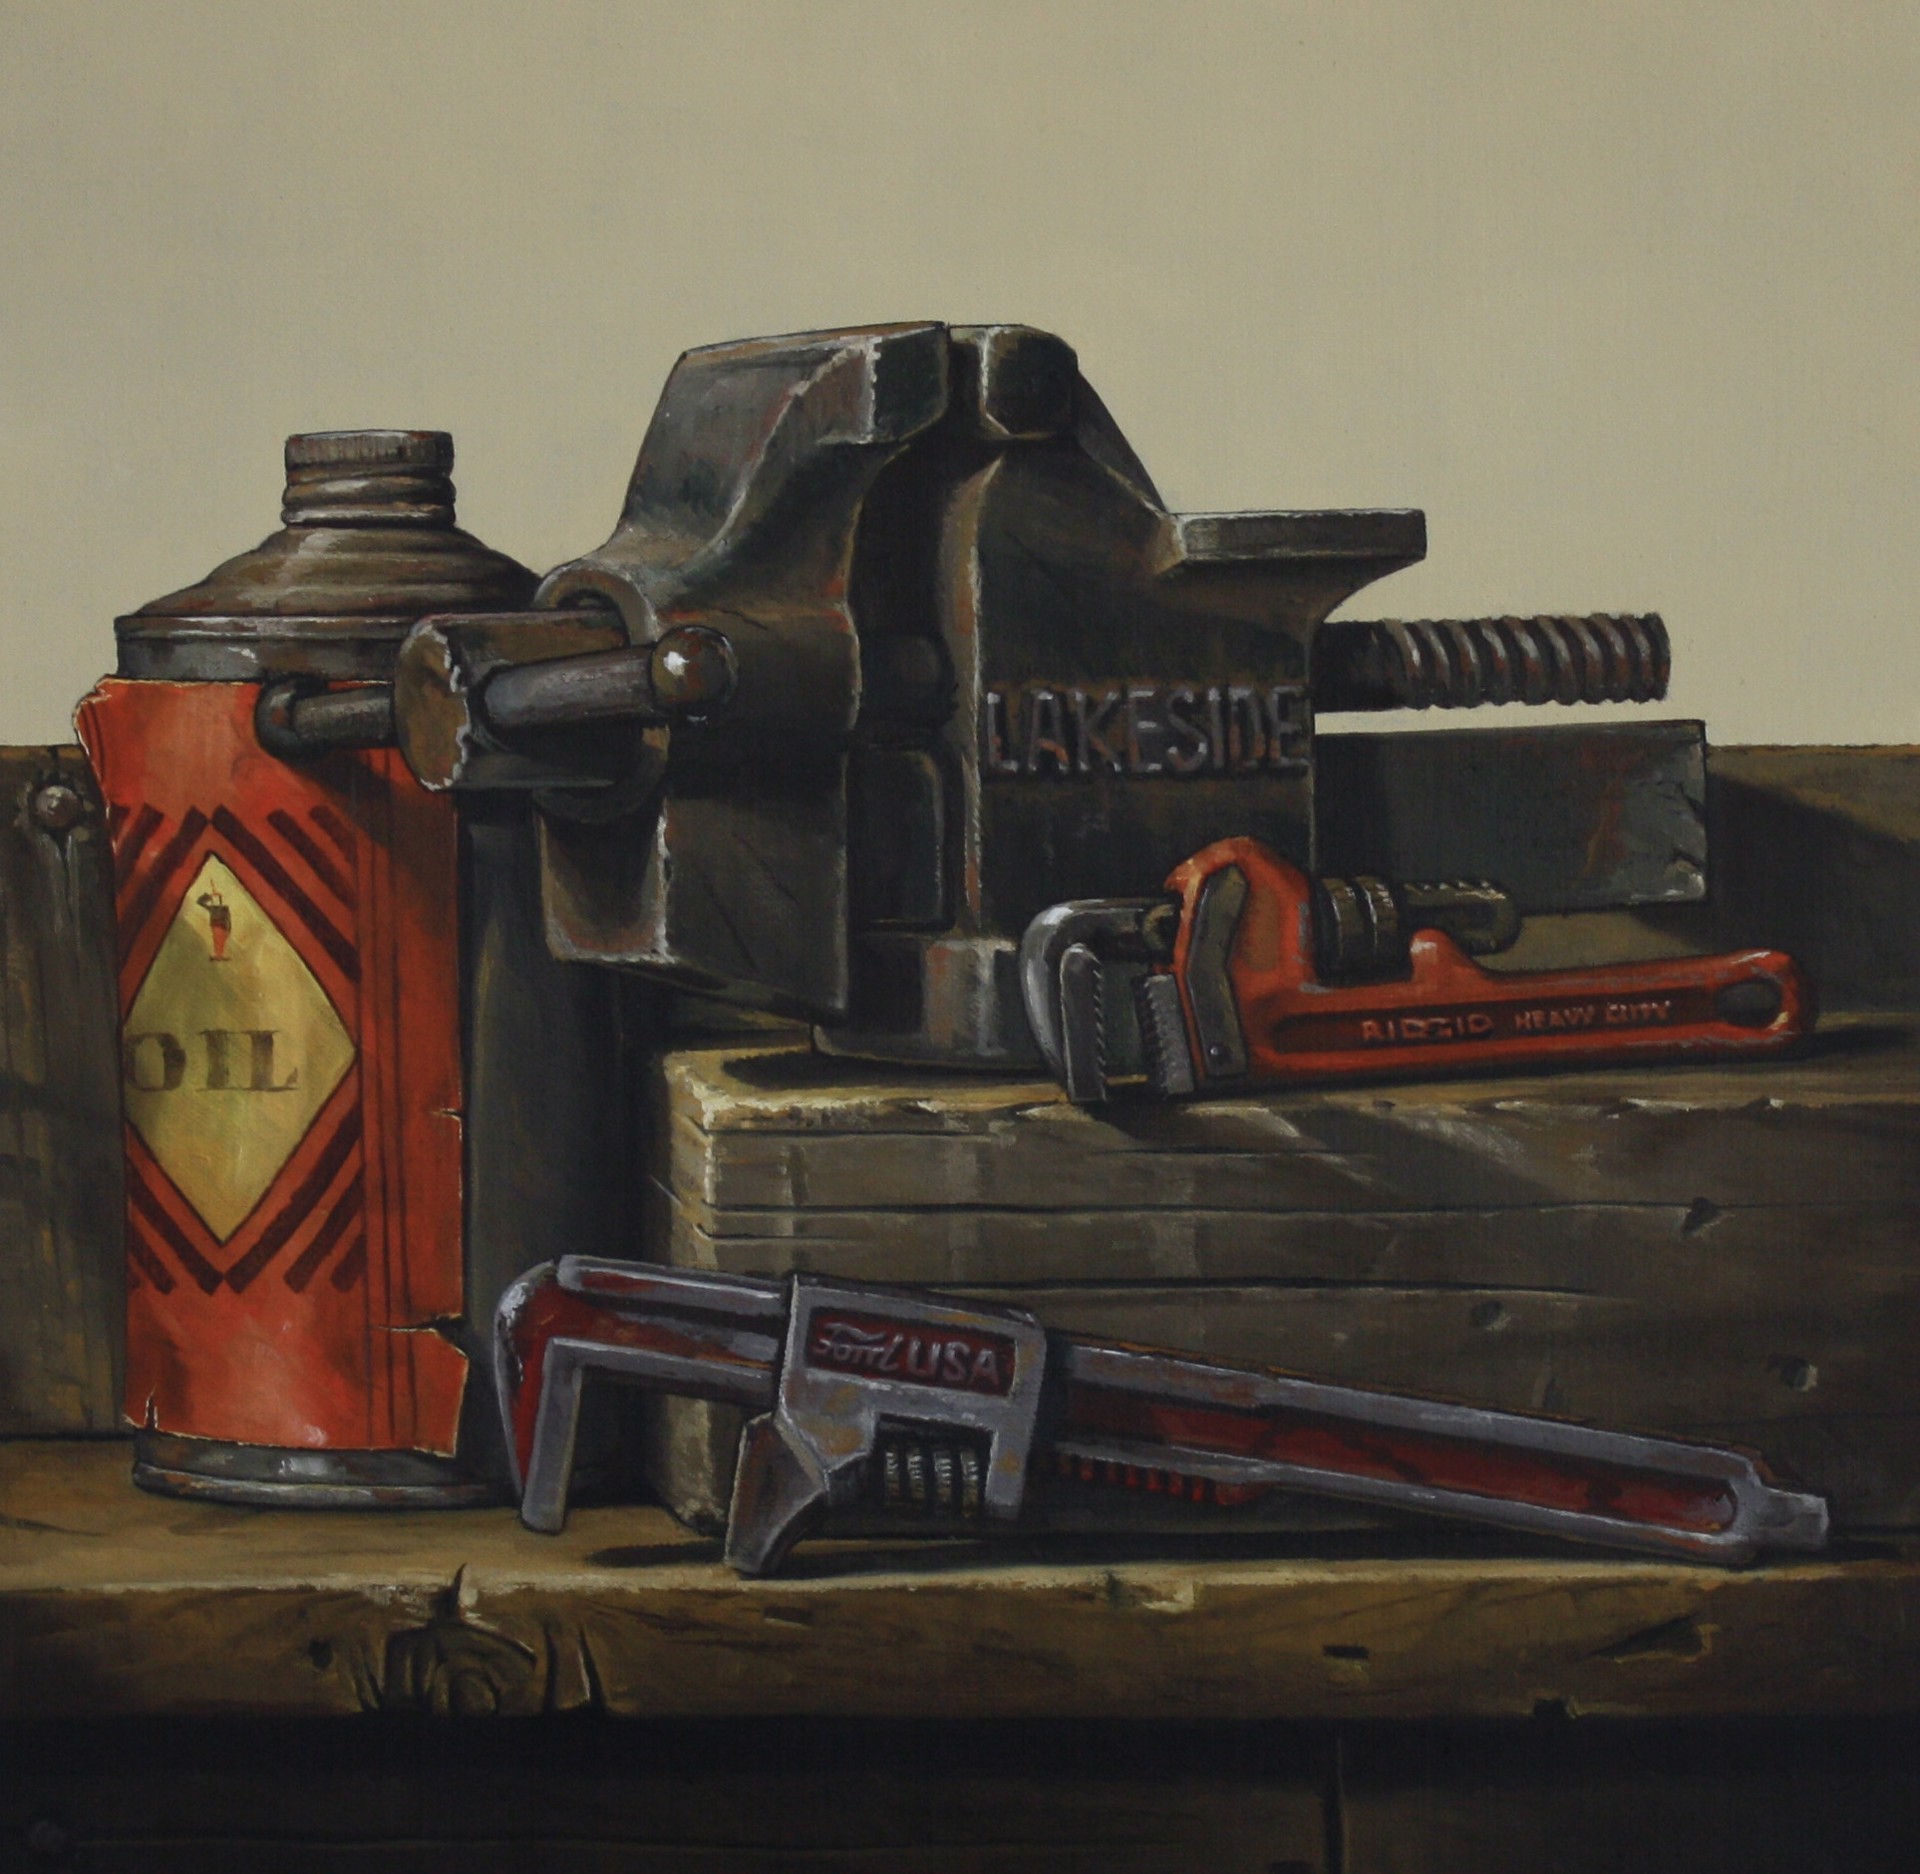 Oil Can by Hickory Mertsching